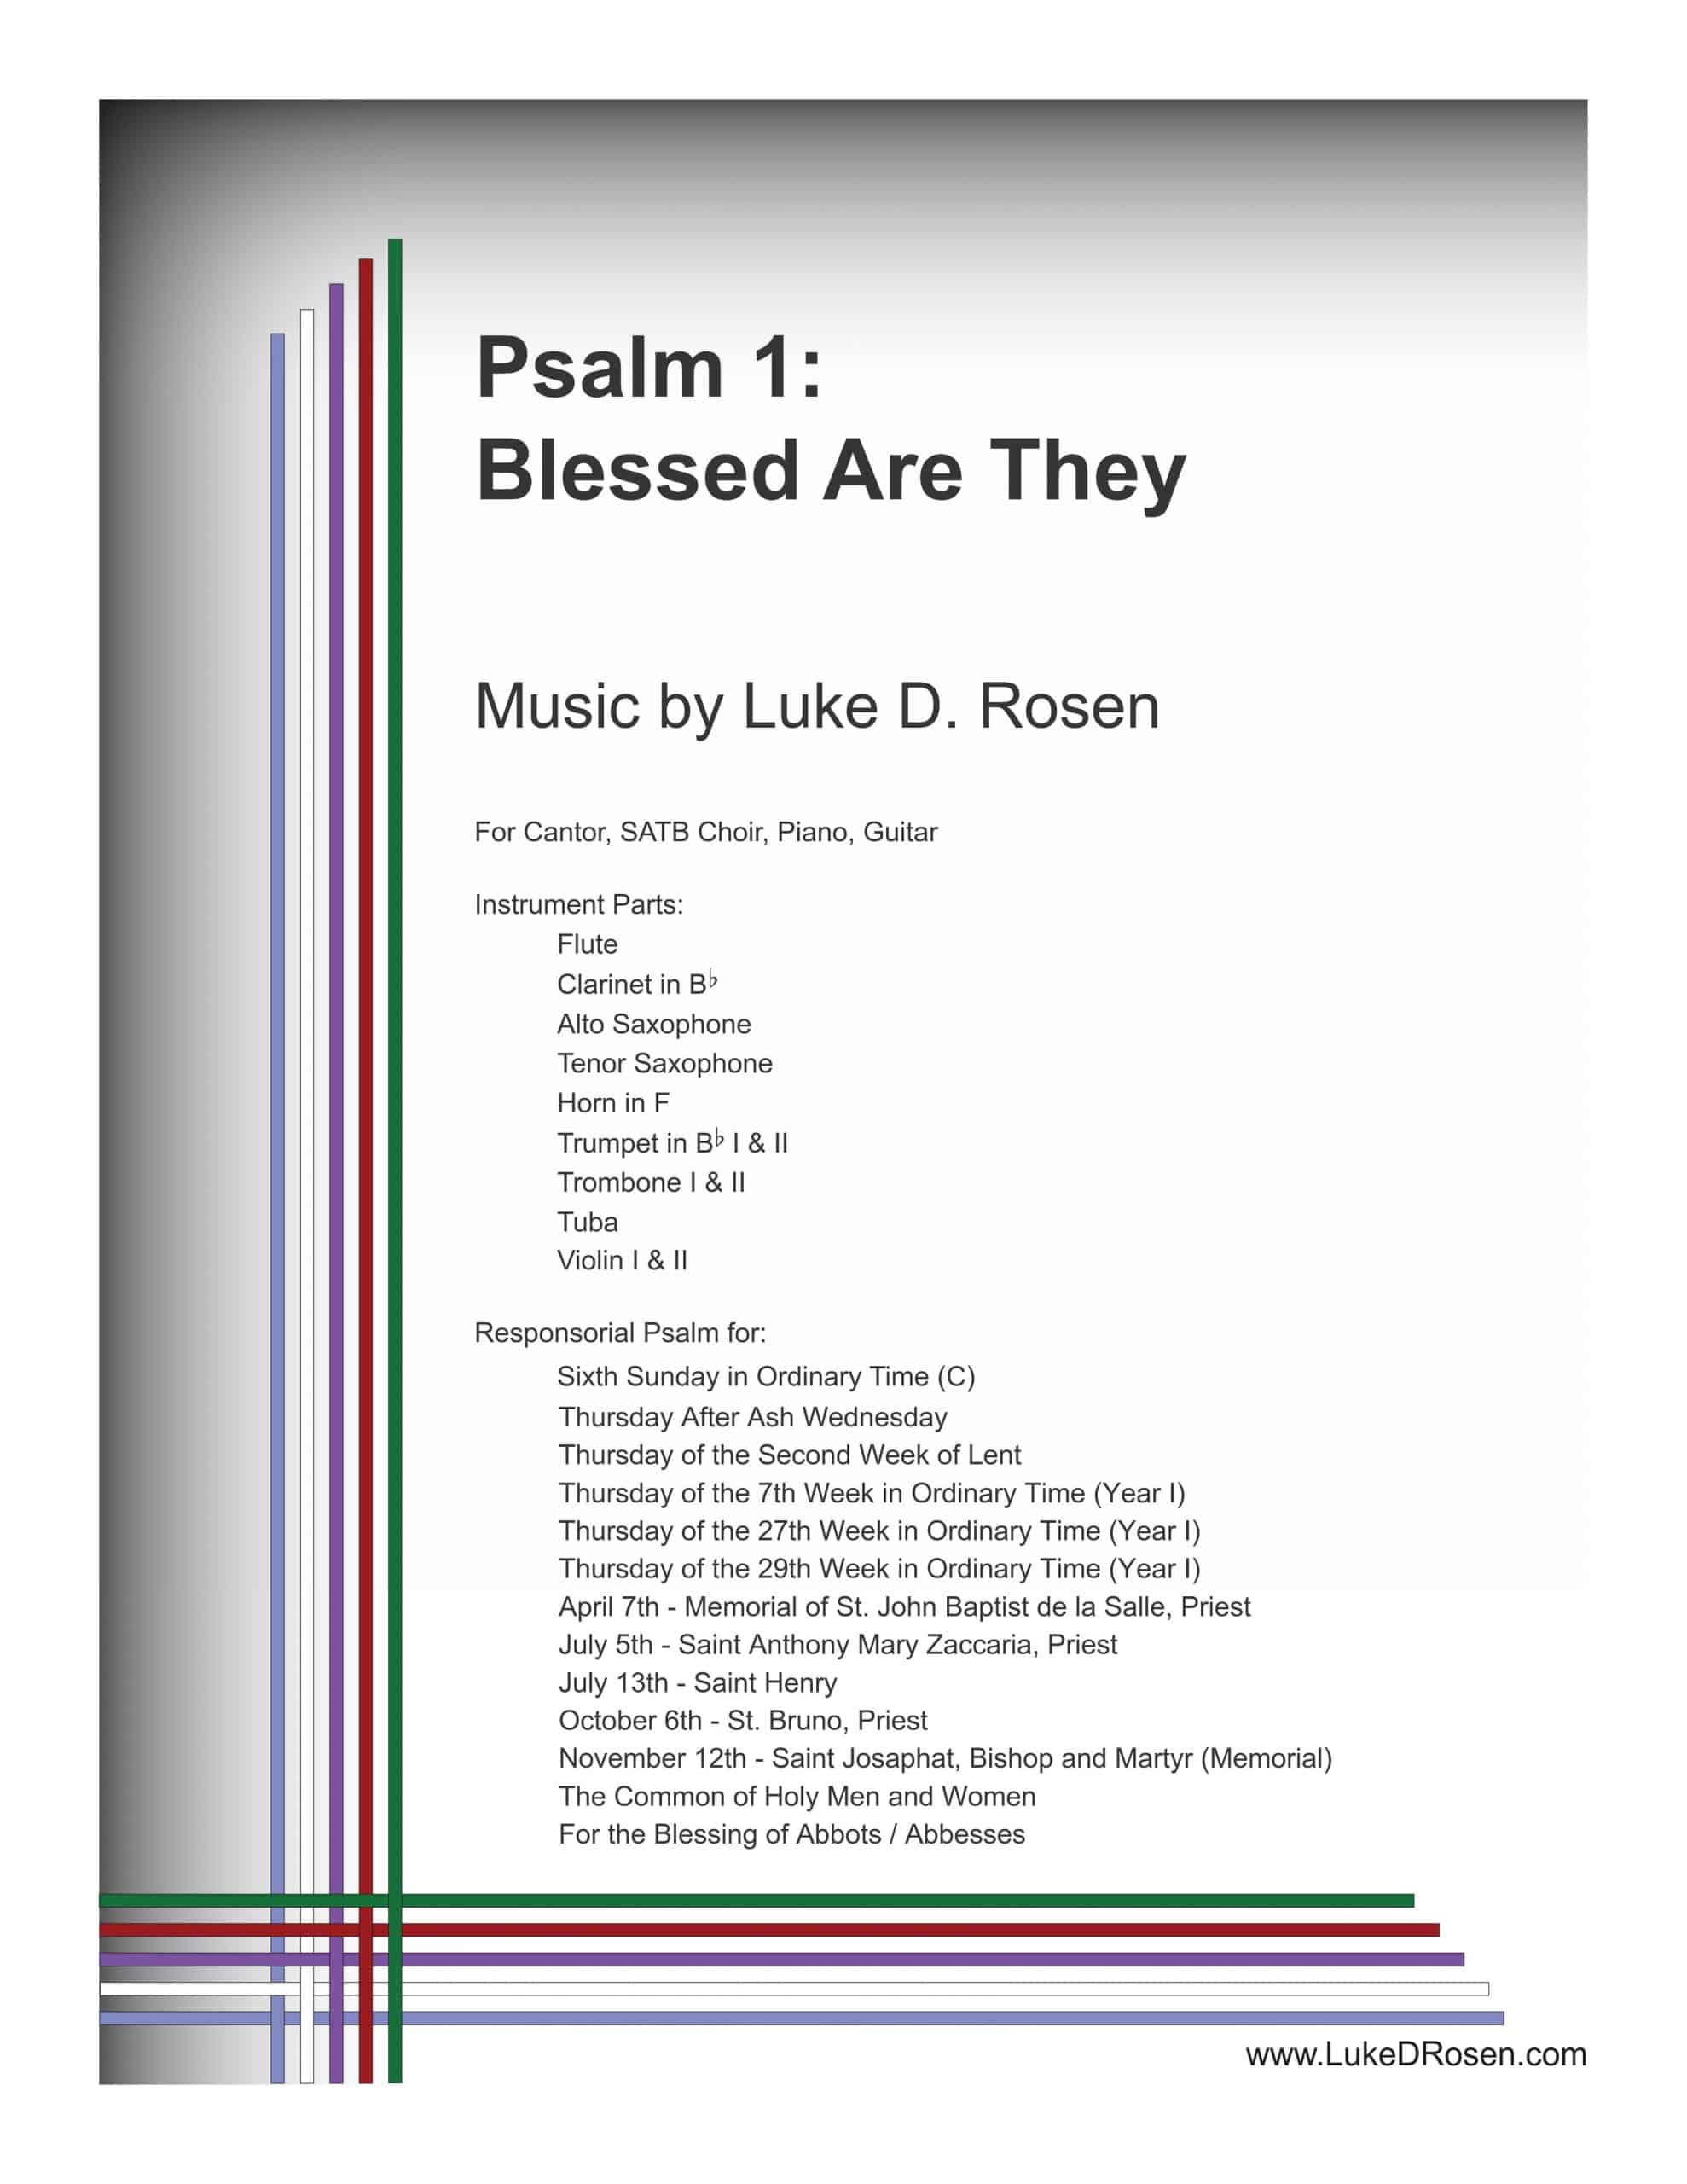 Psalm 1 – Blessed Are They (Rosen)